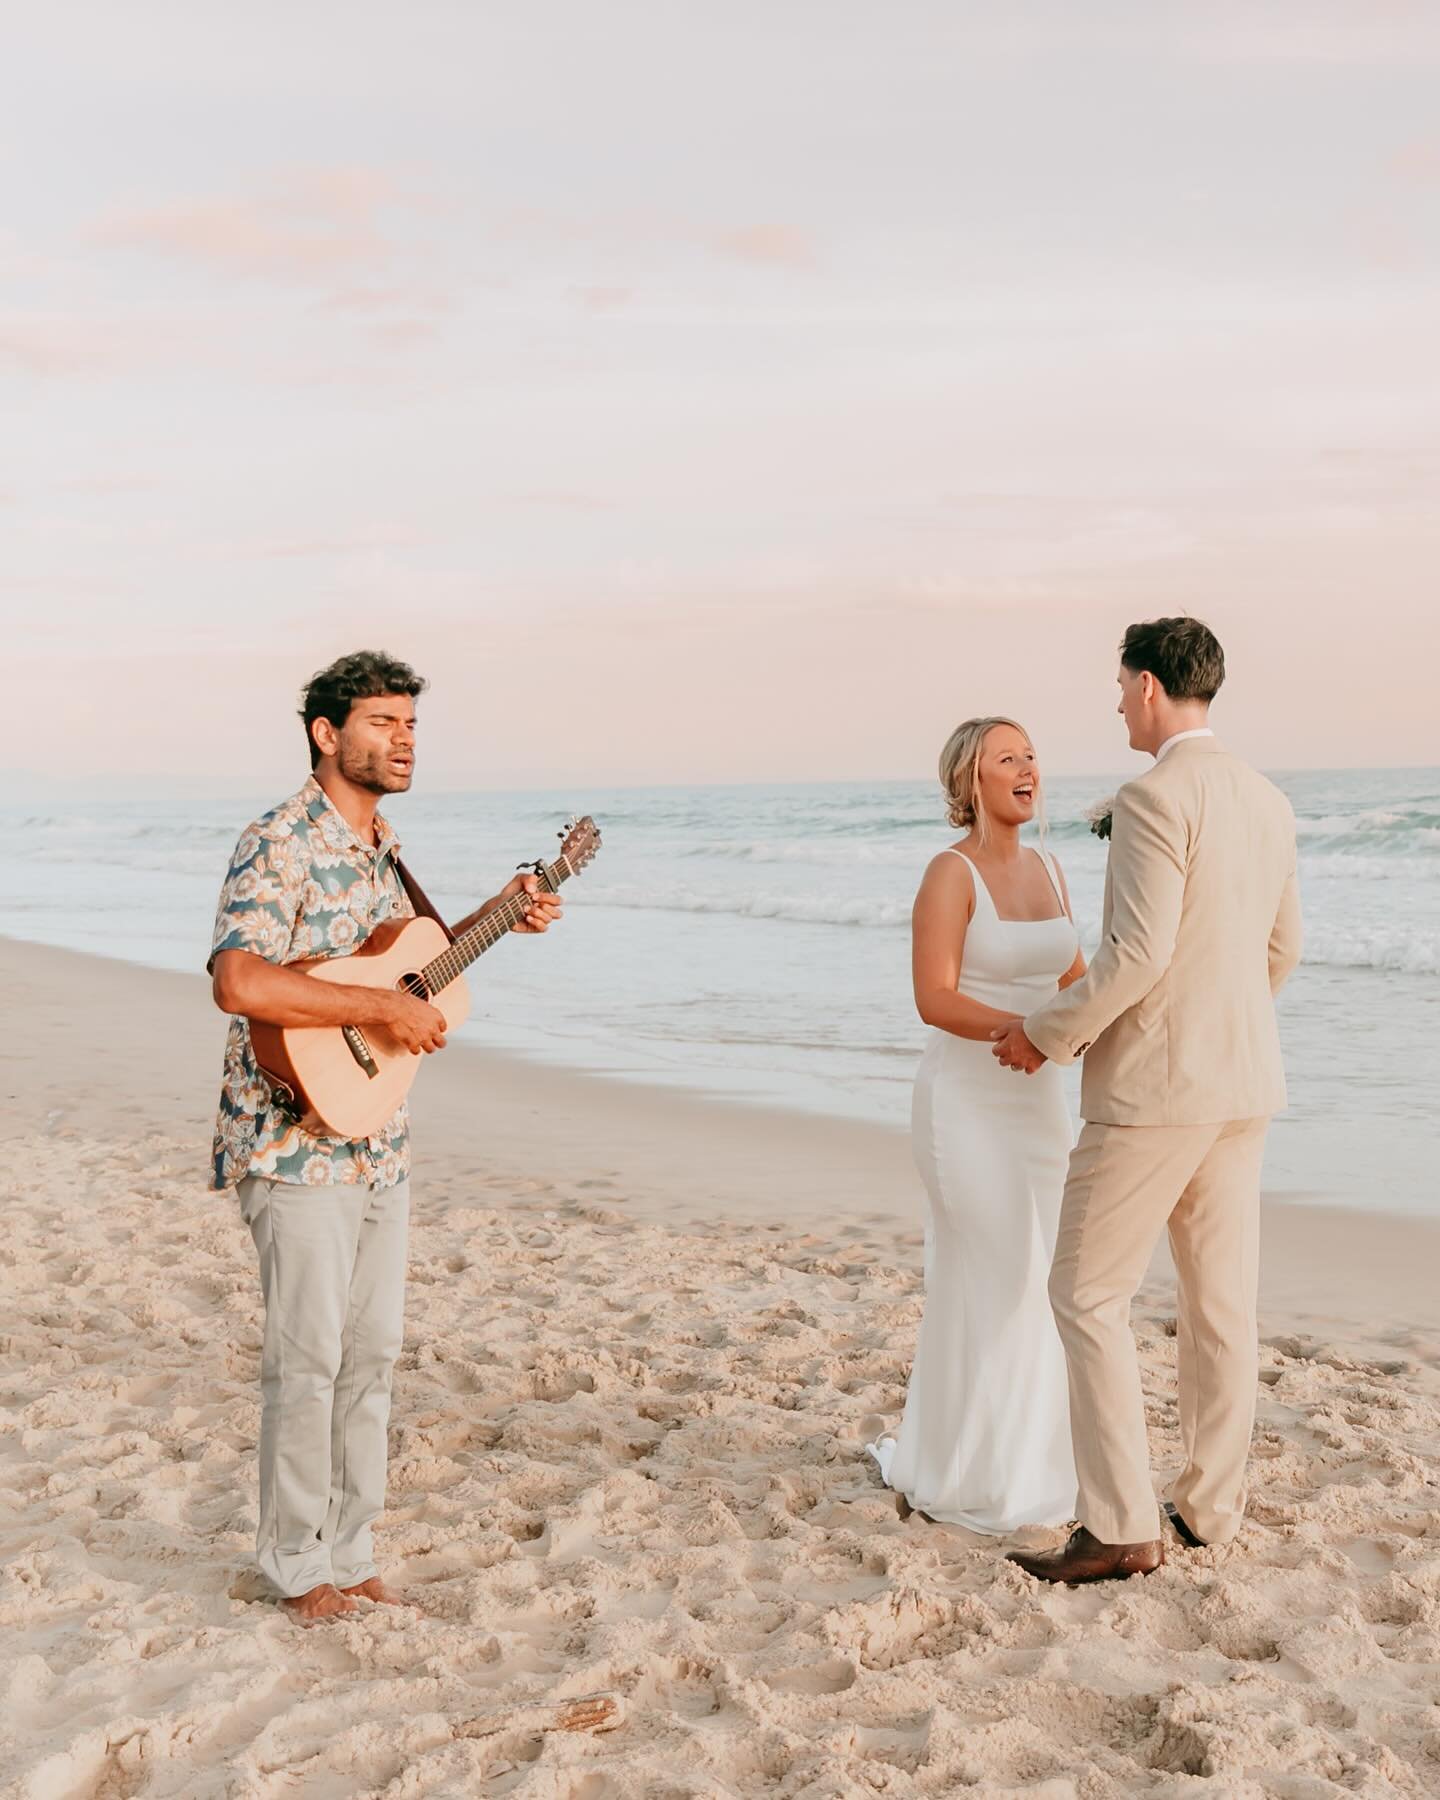 🎊 Indulge in your moments, and eagerly embrace this new chapter with your new and richer experiences together!

Let us help you write your first page: 💜 

📸 // @lady_bella_australia 

Planner: @luxeelopements_byronbay
Celebrant: @leisaottleycelebr